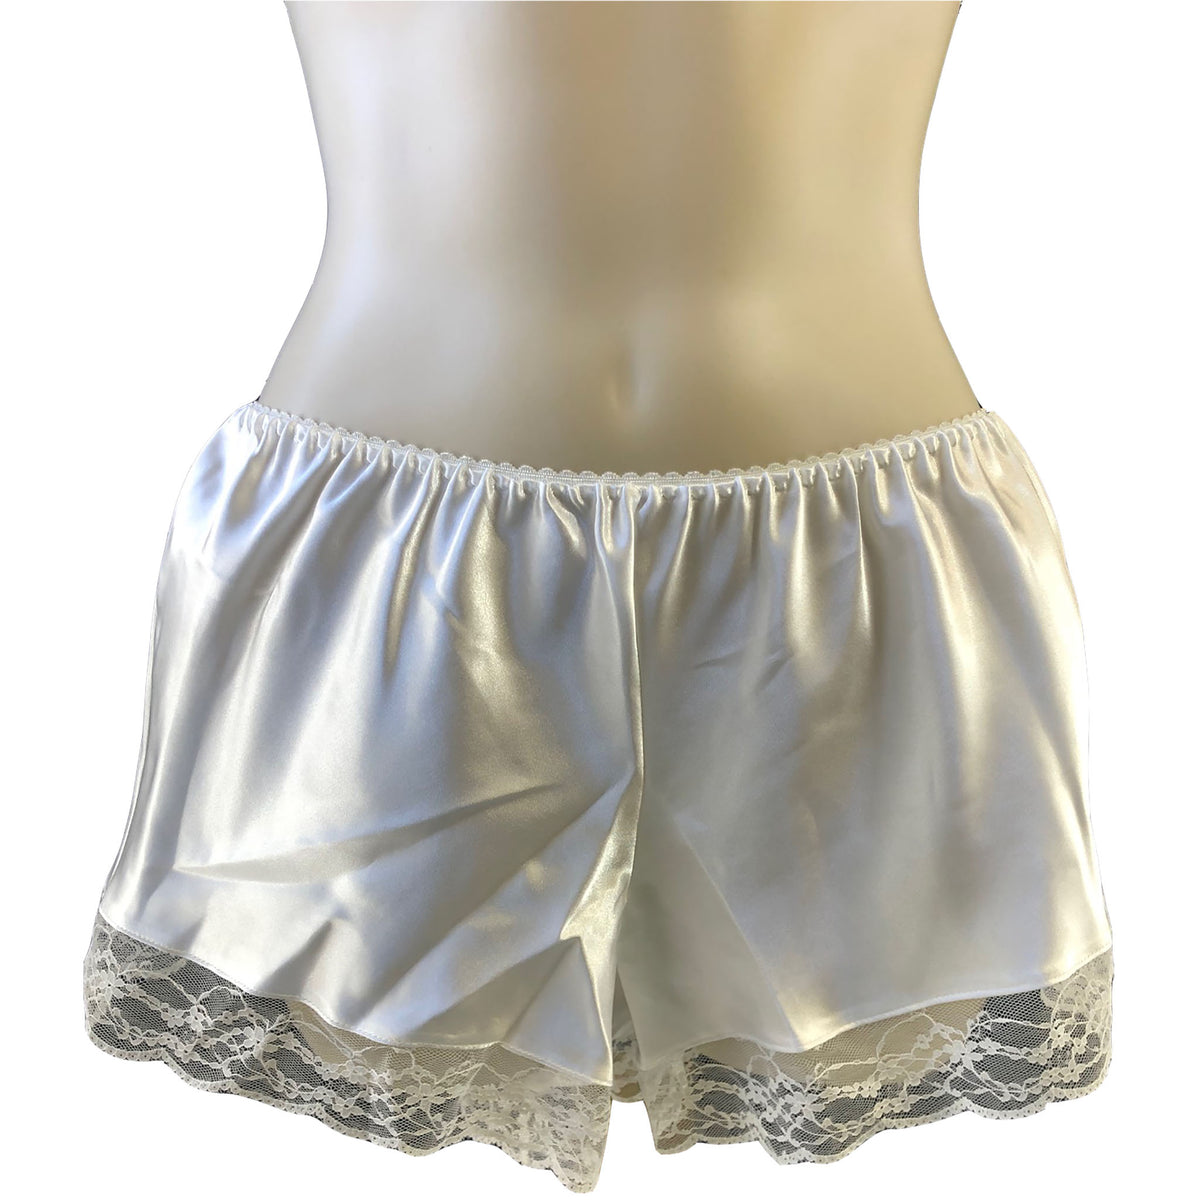 Ivory off White Shiny Satin High Cut French Knicker With Cream Lace Trim.  High Rise Full Bottom Cover Style Sassy Knickers French Panties -   Canada